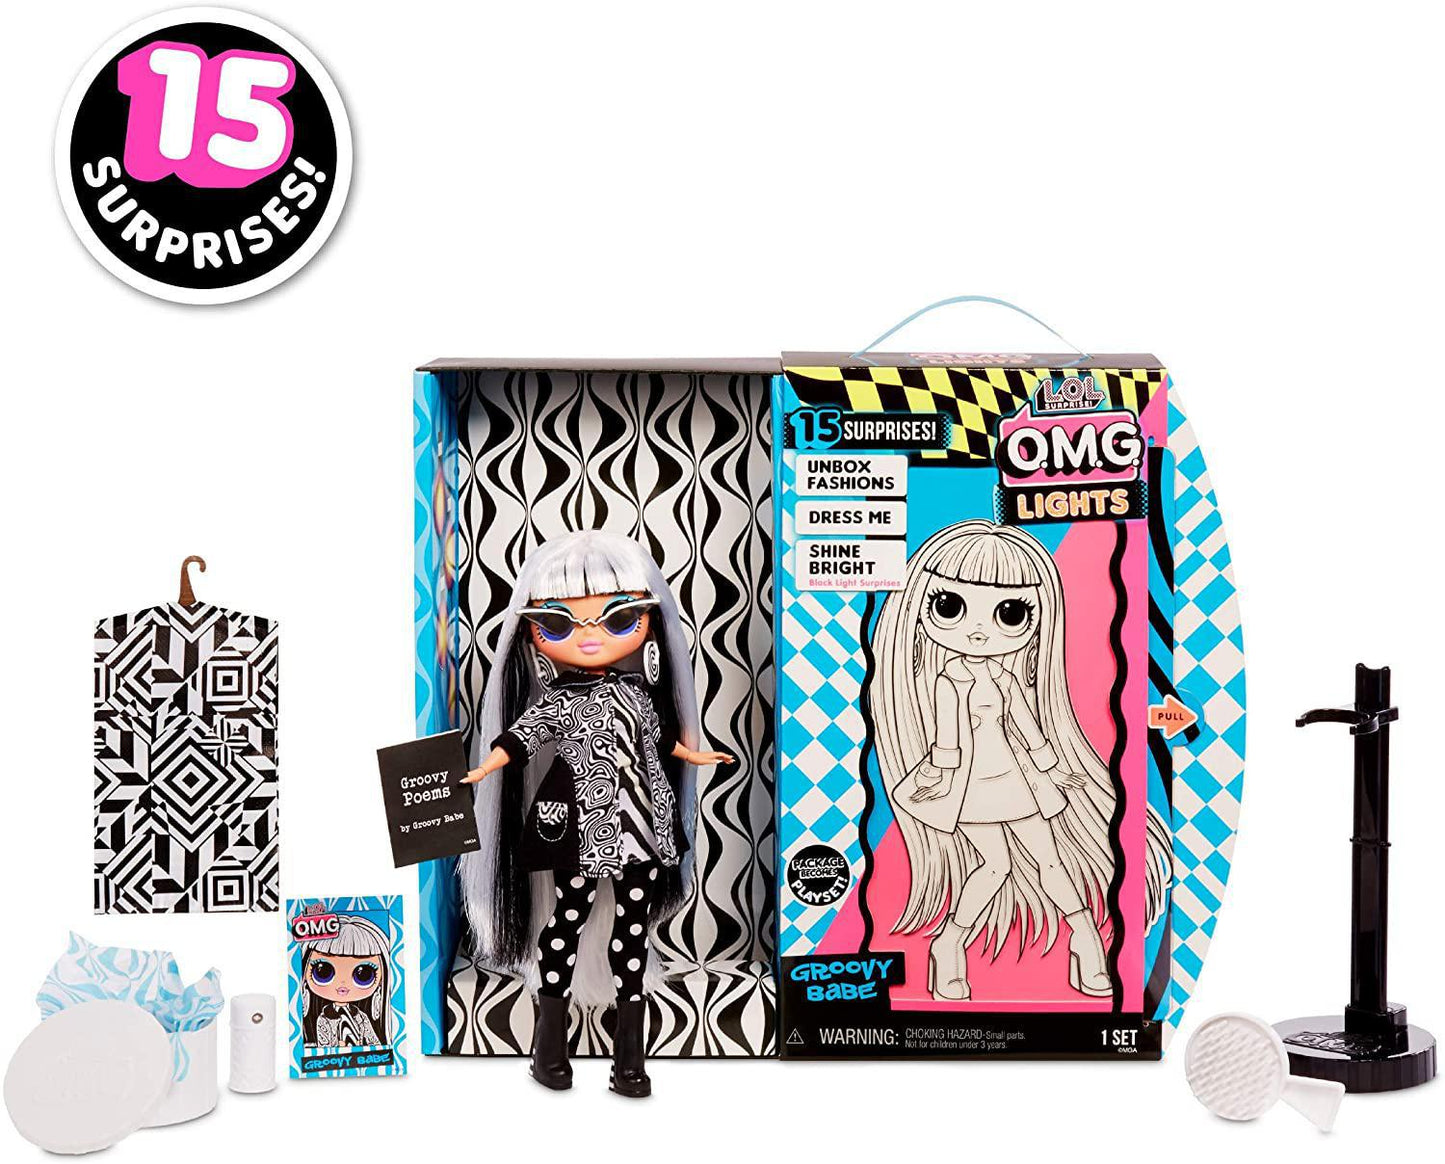 L.O.L. Surprise! O.M.G. Lights Fashion Doll with 15 Surprises - Doll Lights: Groovy Babe, Dazzle, Angles, Speedster